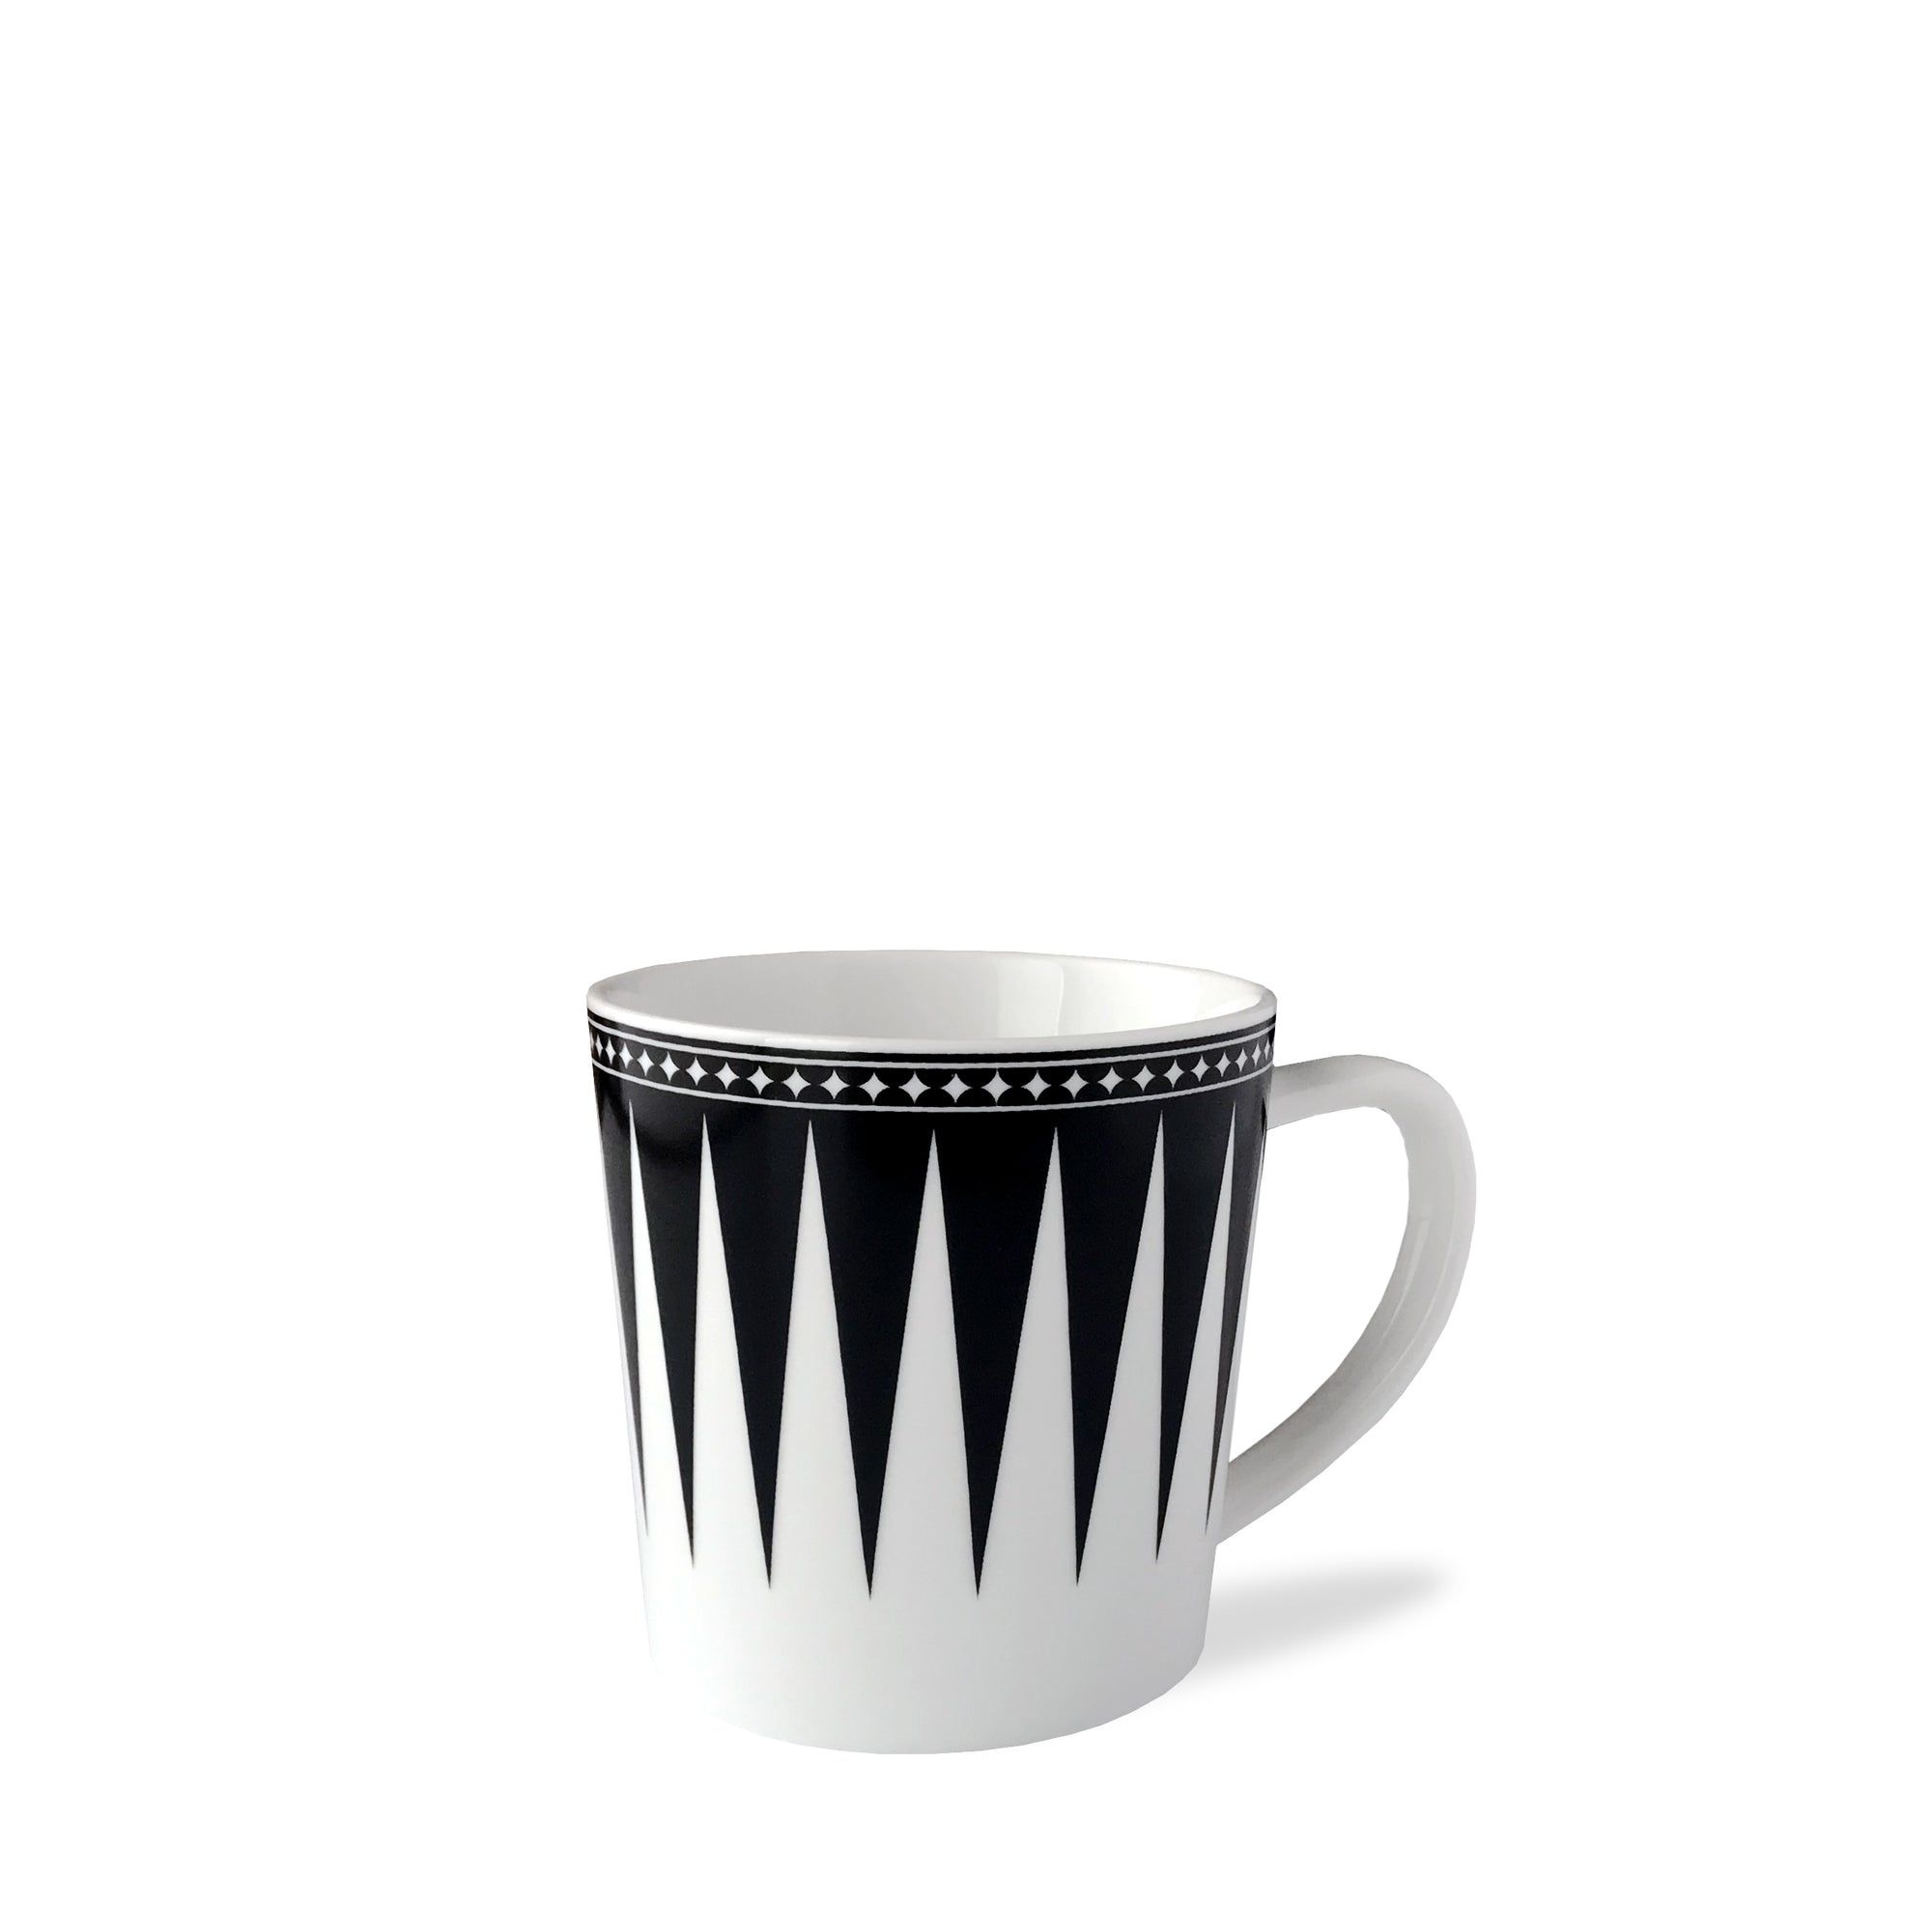 The Marrakech Mug by Caskata Artisanal Home is a white high-fired porcelain coffee mug with a black geometric triangular pattern and a black border adorned with small white stars near the rim, reminiscent of Art Deco designs.